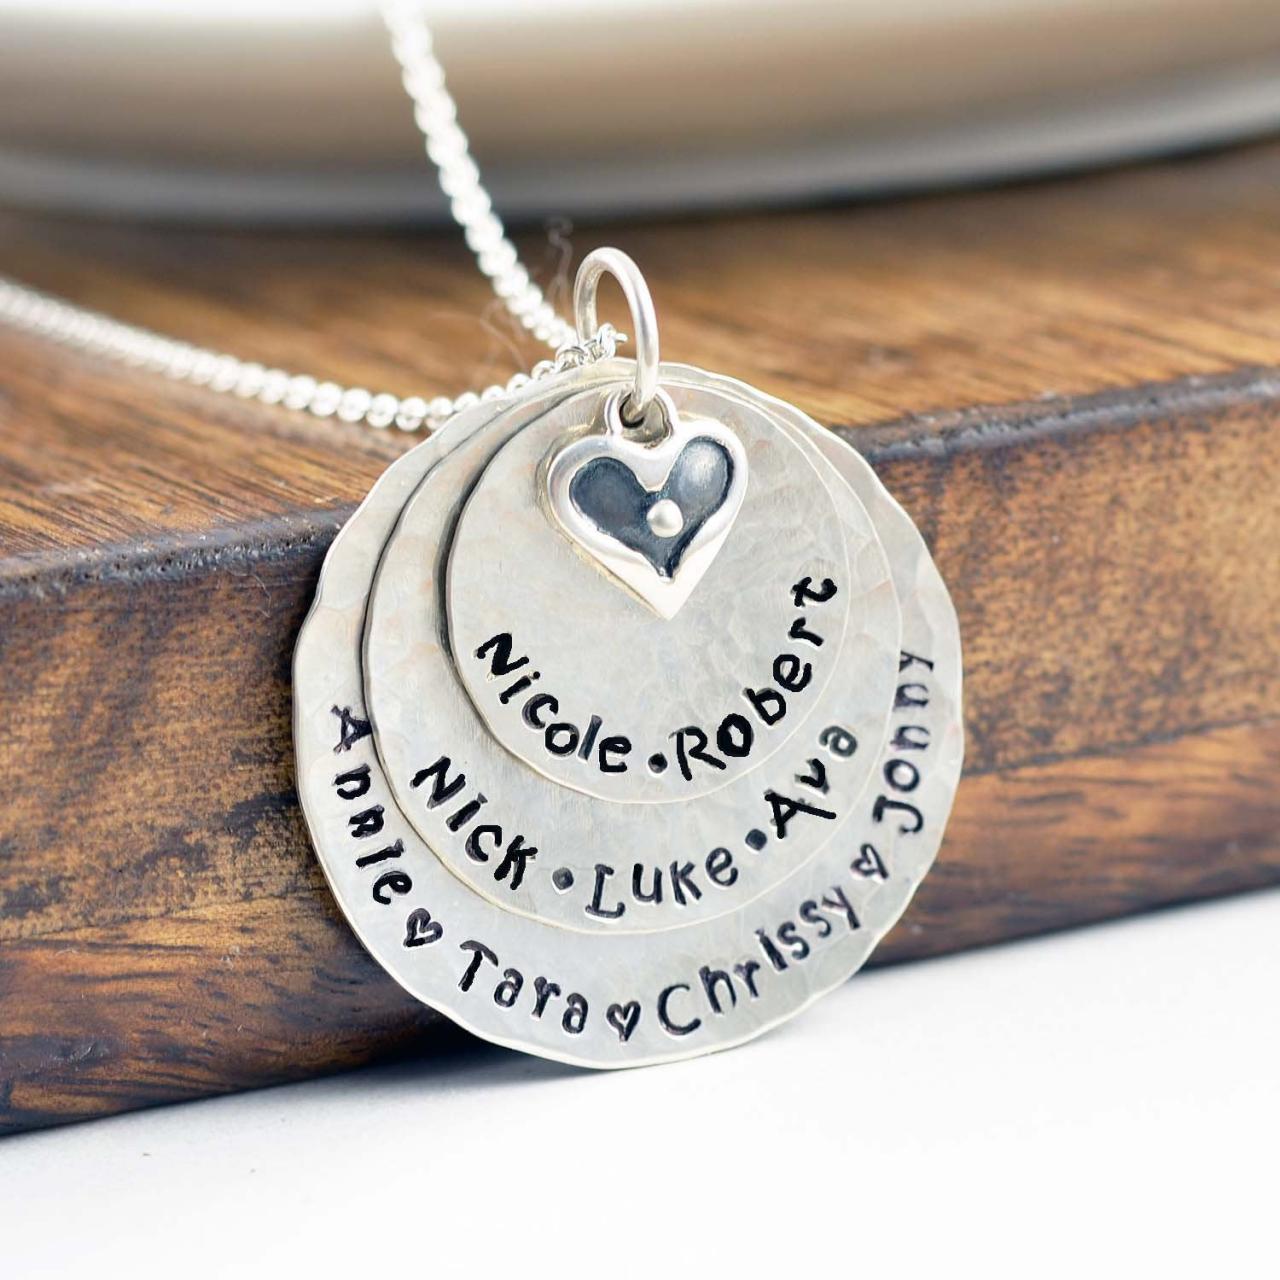 Personalized Silver Necklace, Mother's Necklace, Kids Name Necklace, Mothers Day Gift, Grandmother Necklace, Grandmother Gift, Grandma